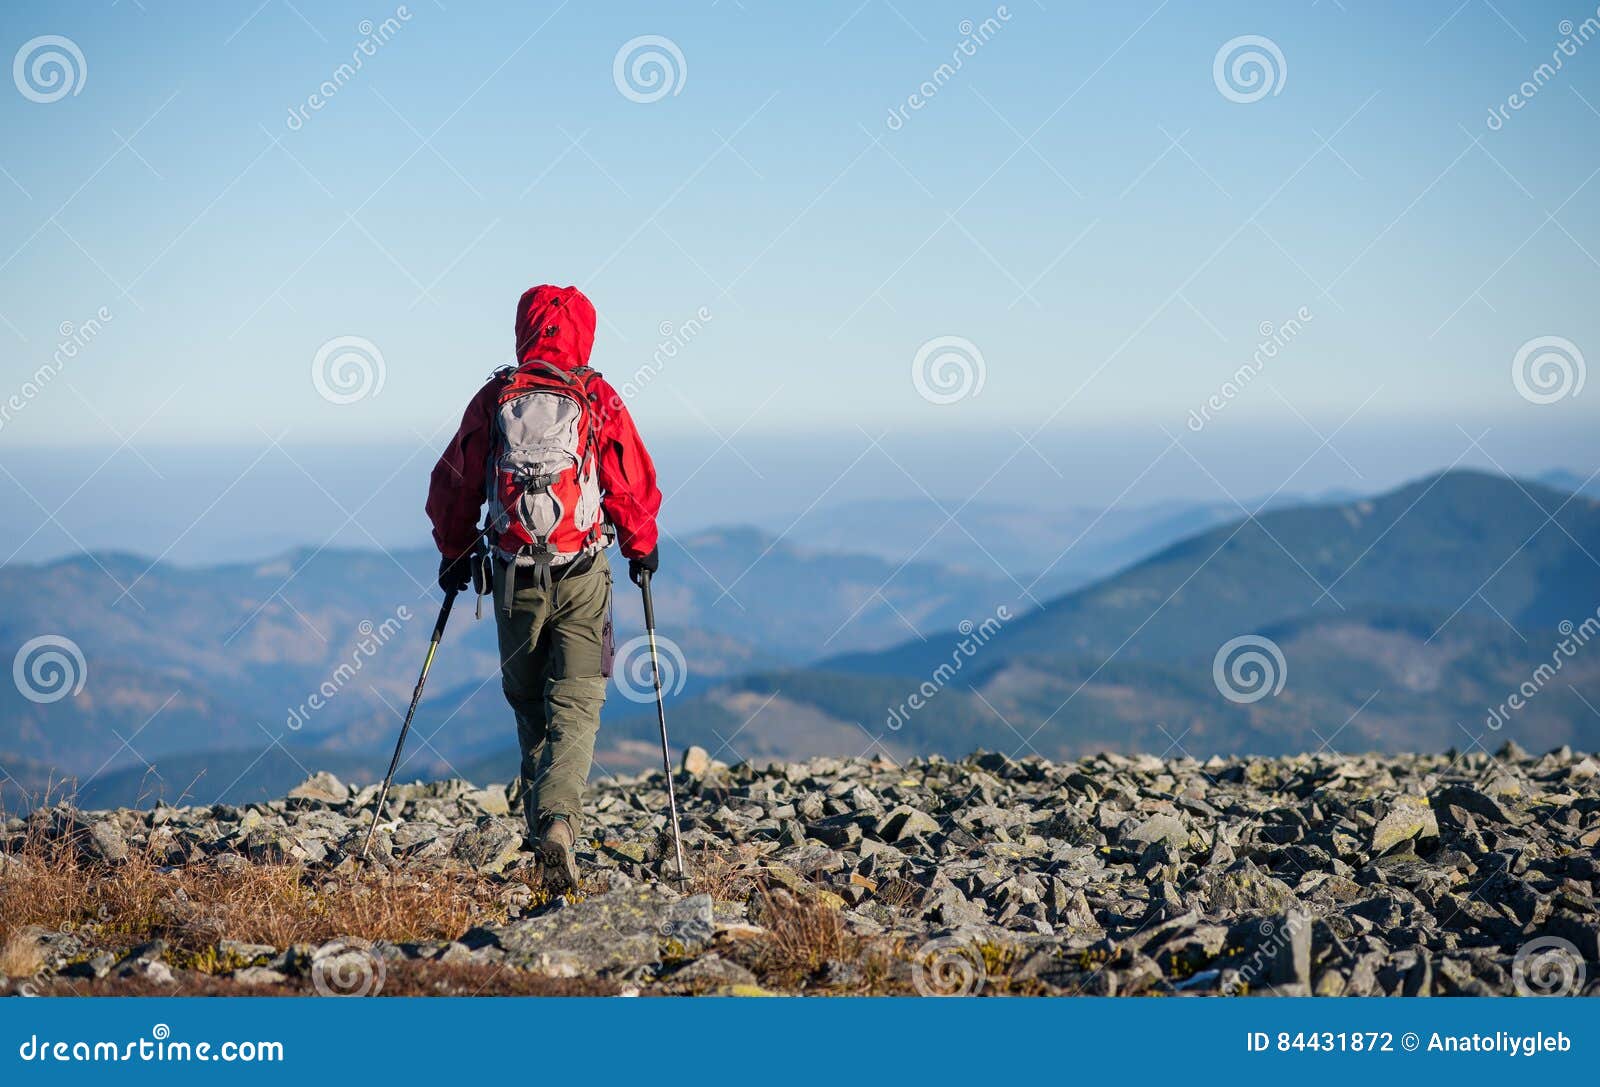 male backpaker walking on the rocky top of the mountain